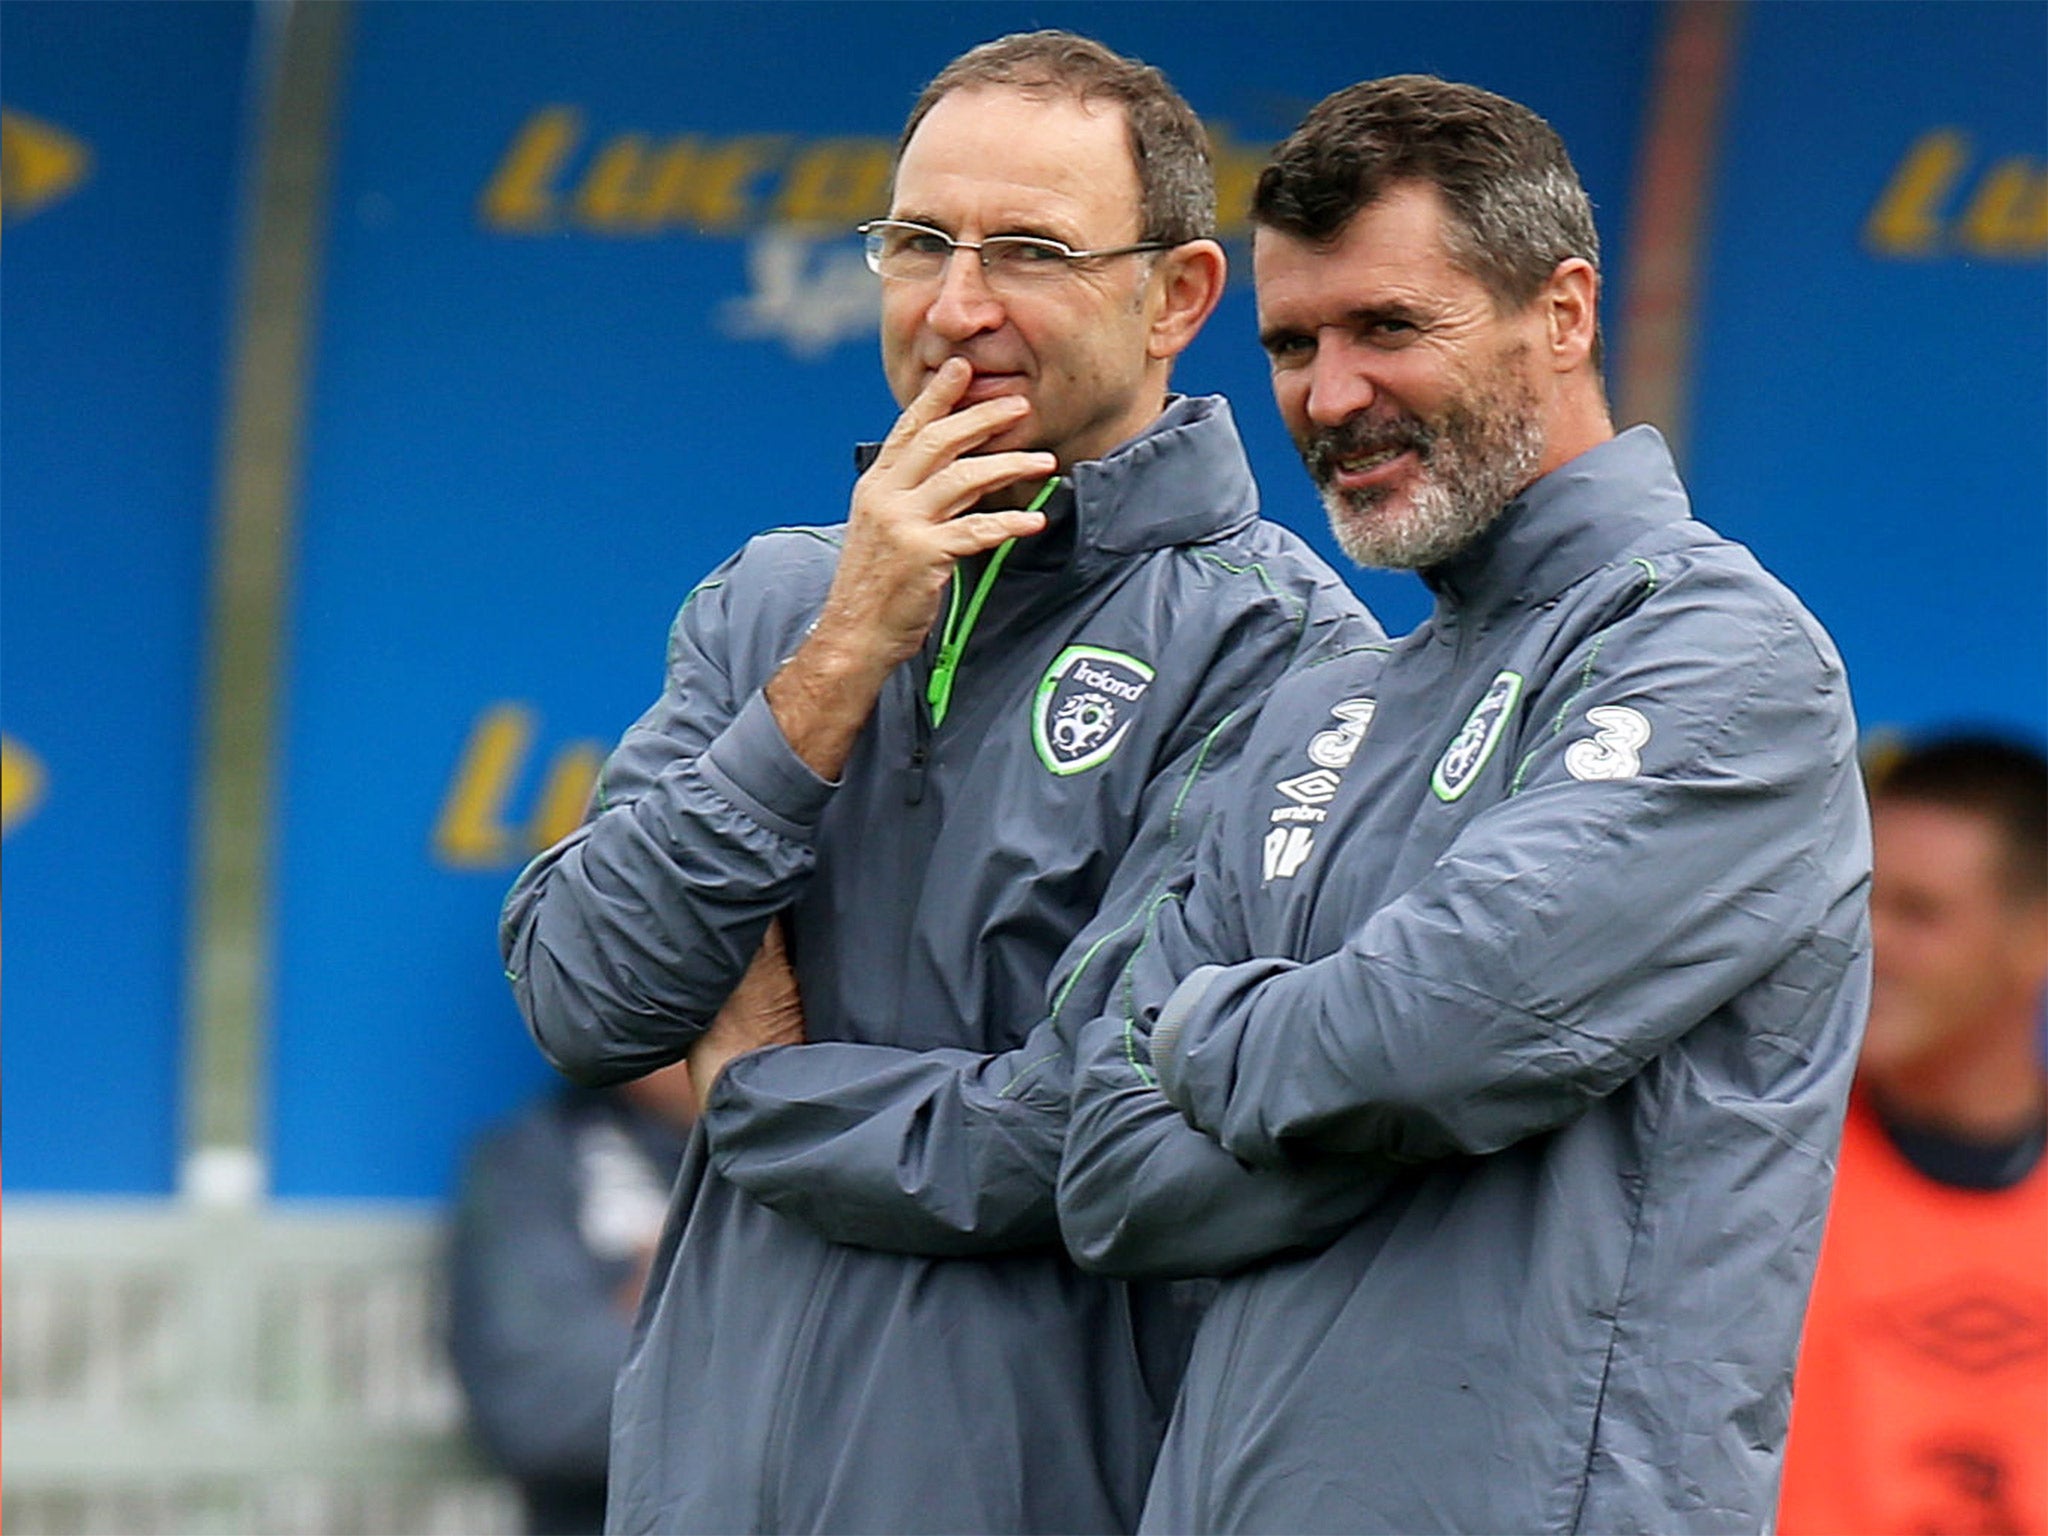 Martin O'Neill manages to elicit a rare smile from his assistant Roy Keane